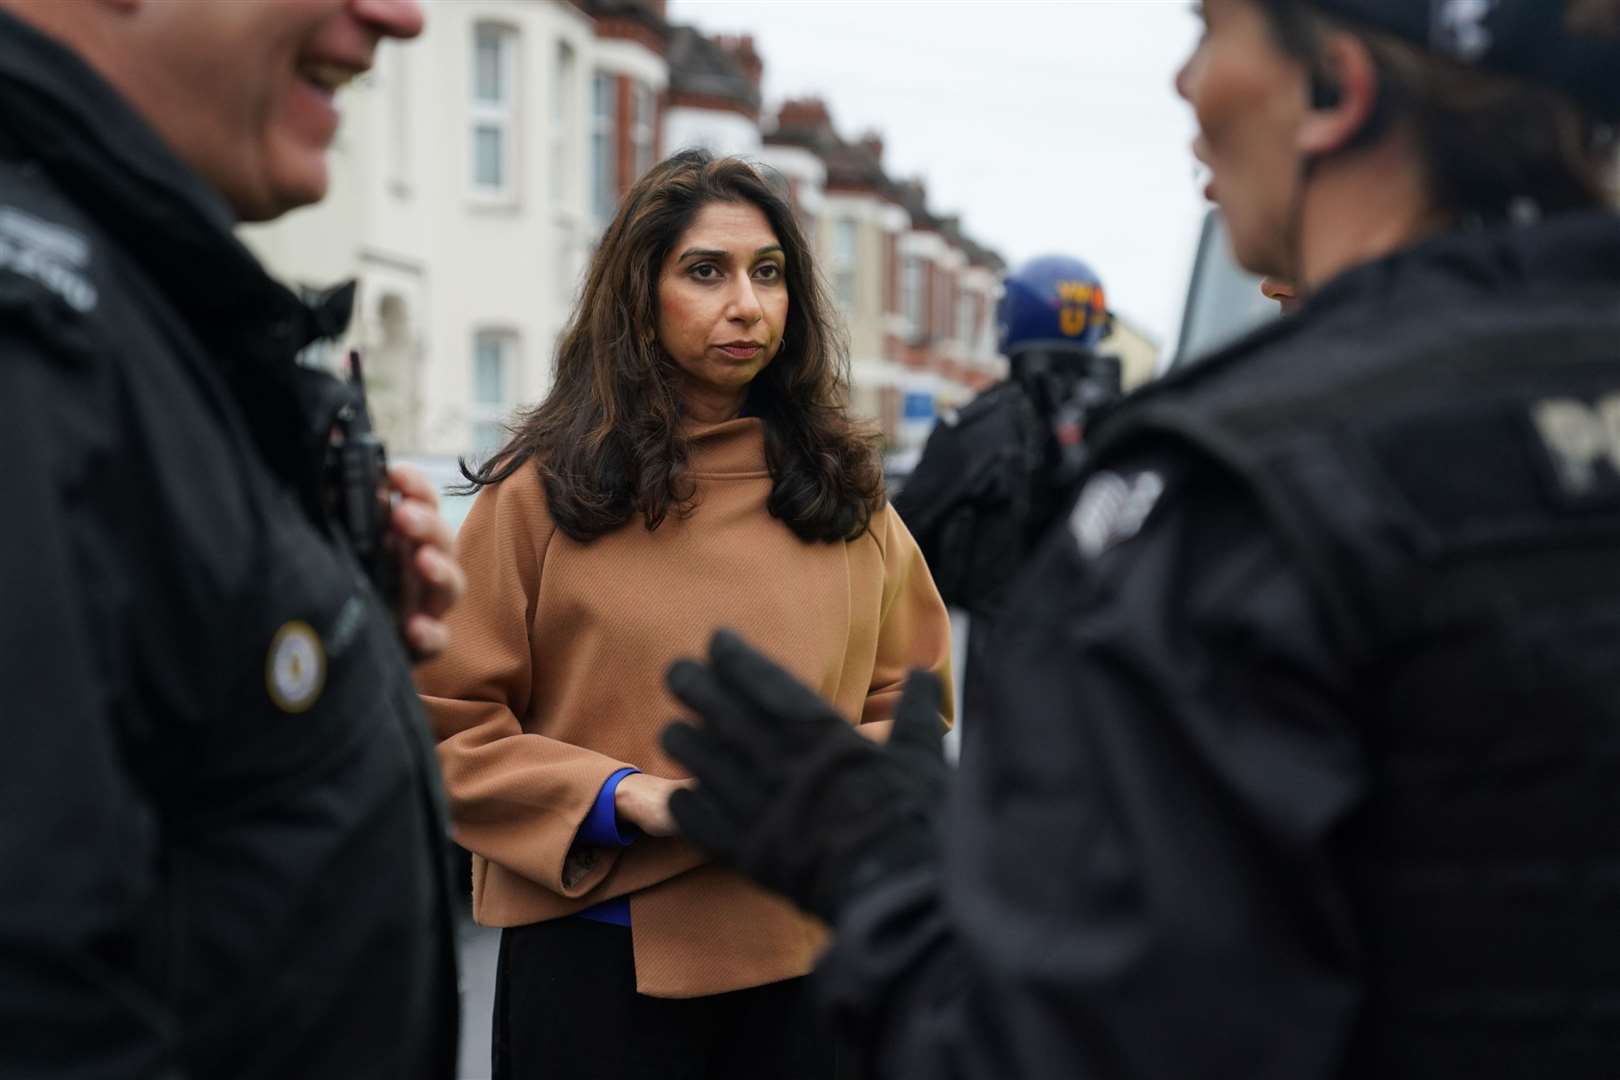 Suella Braverman accused the police of showing bias in favour of left-wing protesters (PA)